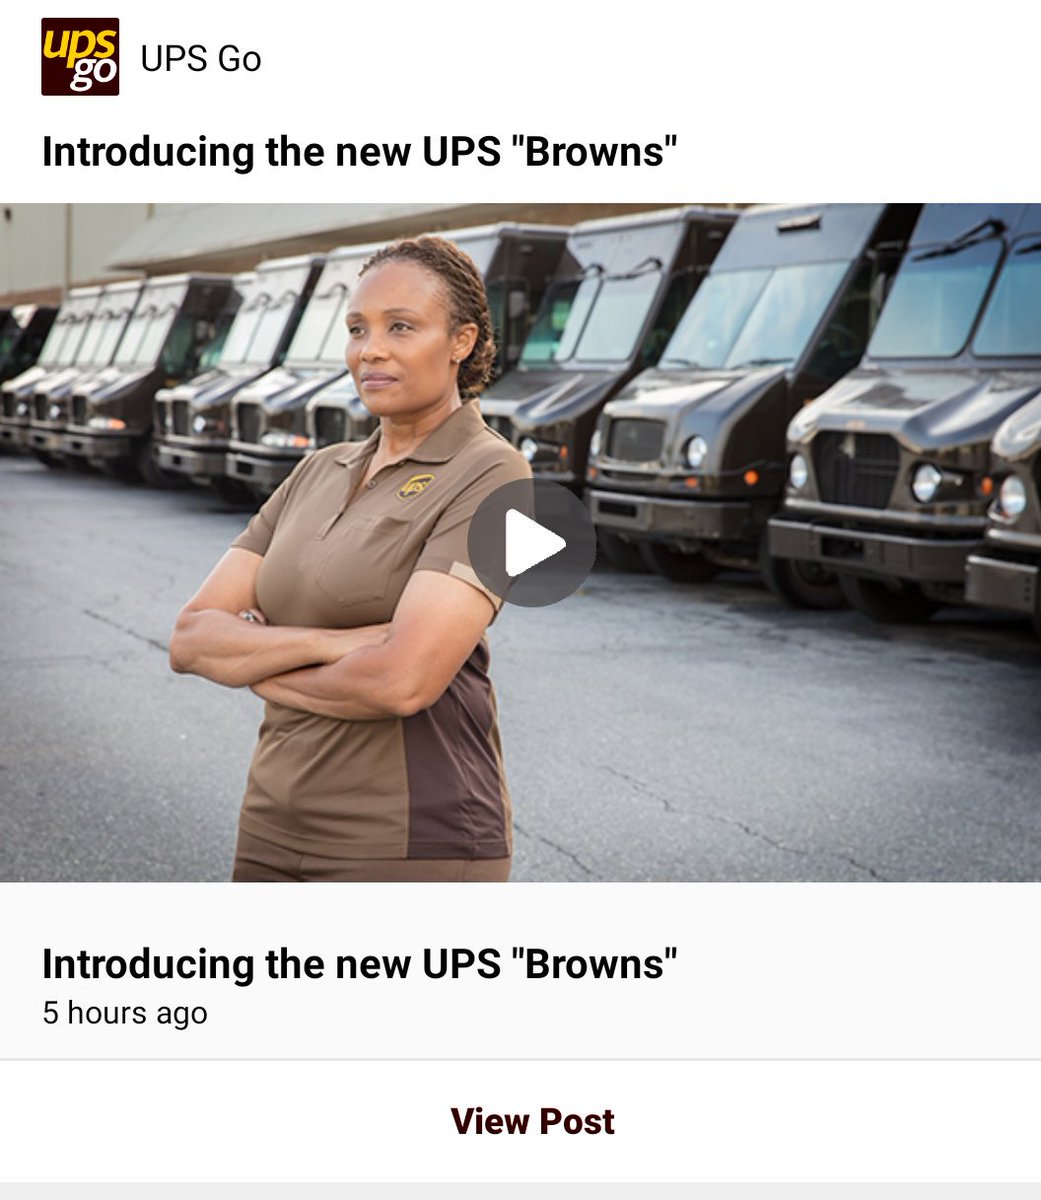 Check out the new uniform release on the #UPSgo app. Think I'll have to go back driving just to get a pair. #Newthreads #NewBrowns